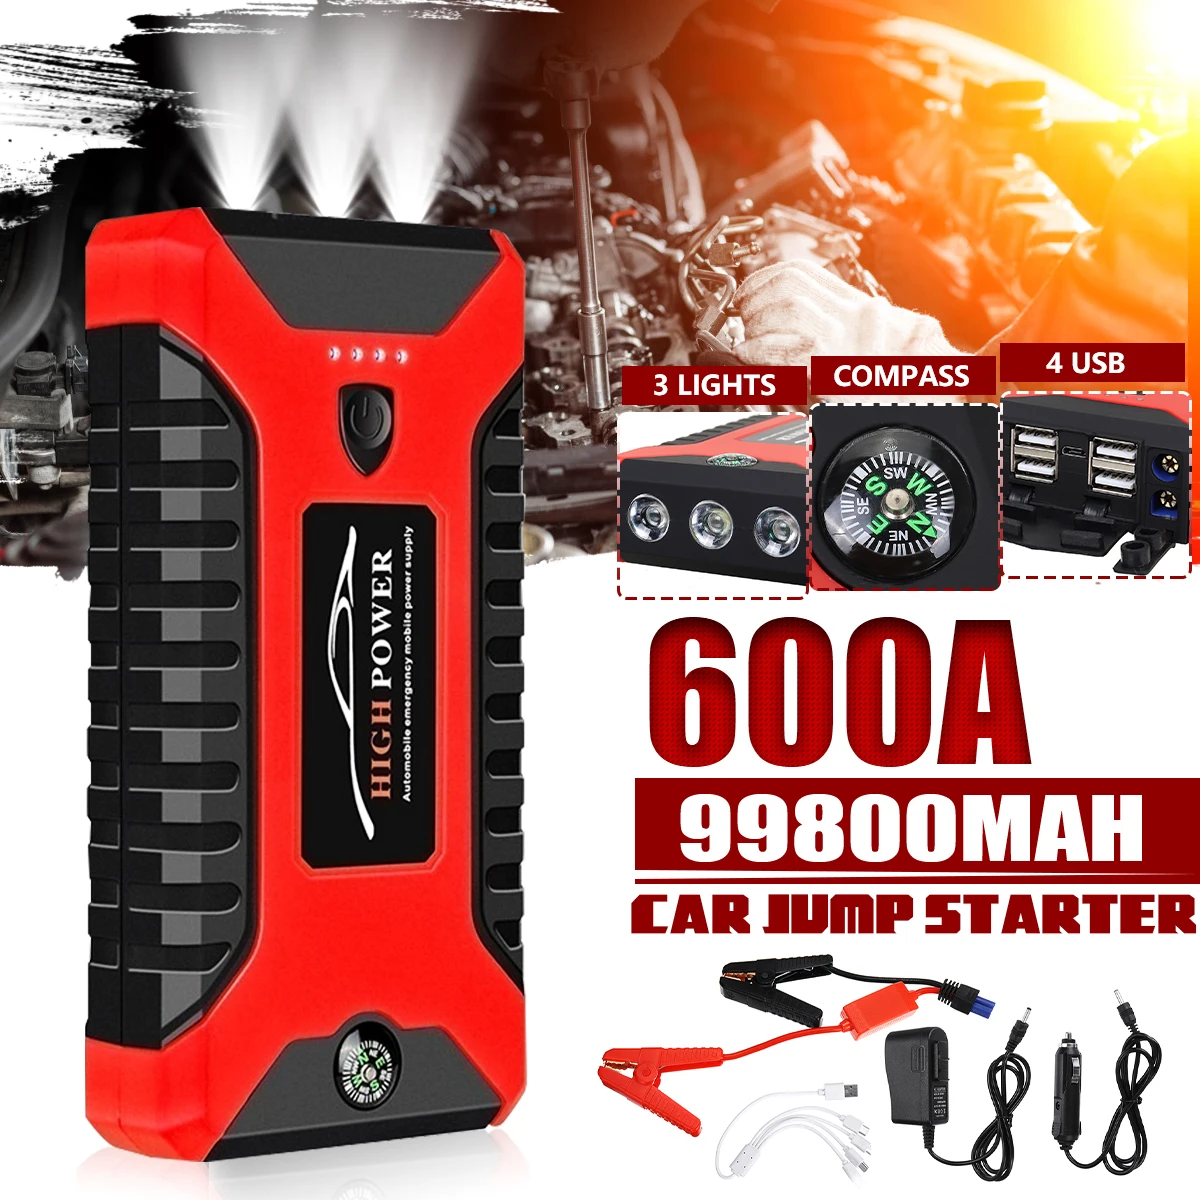 

99800mAh Car Jump Starter Pack 600A Portable 4 USB Power Bank Car Battery Booster Charger 12V Starting Device Car Startee Buster